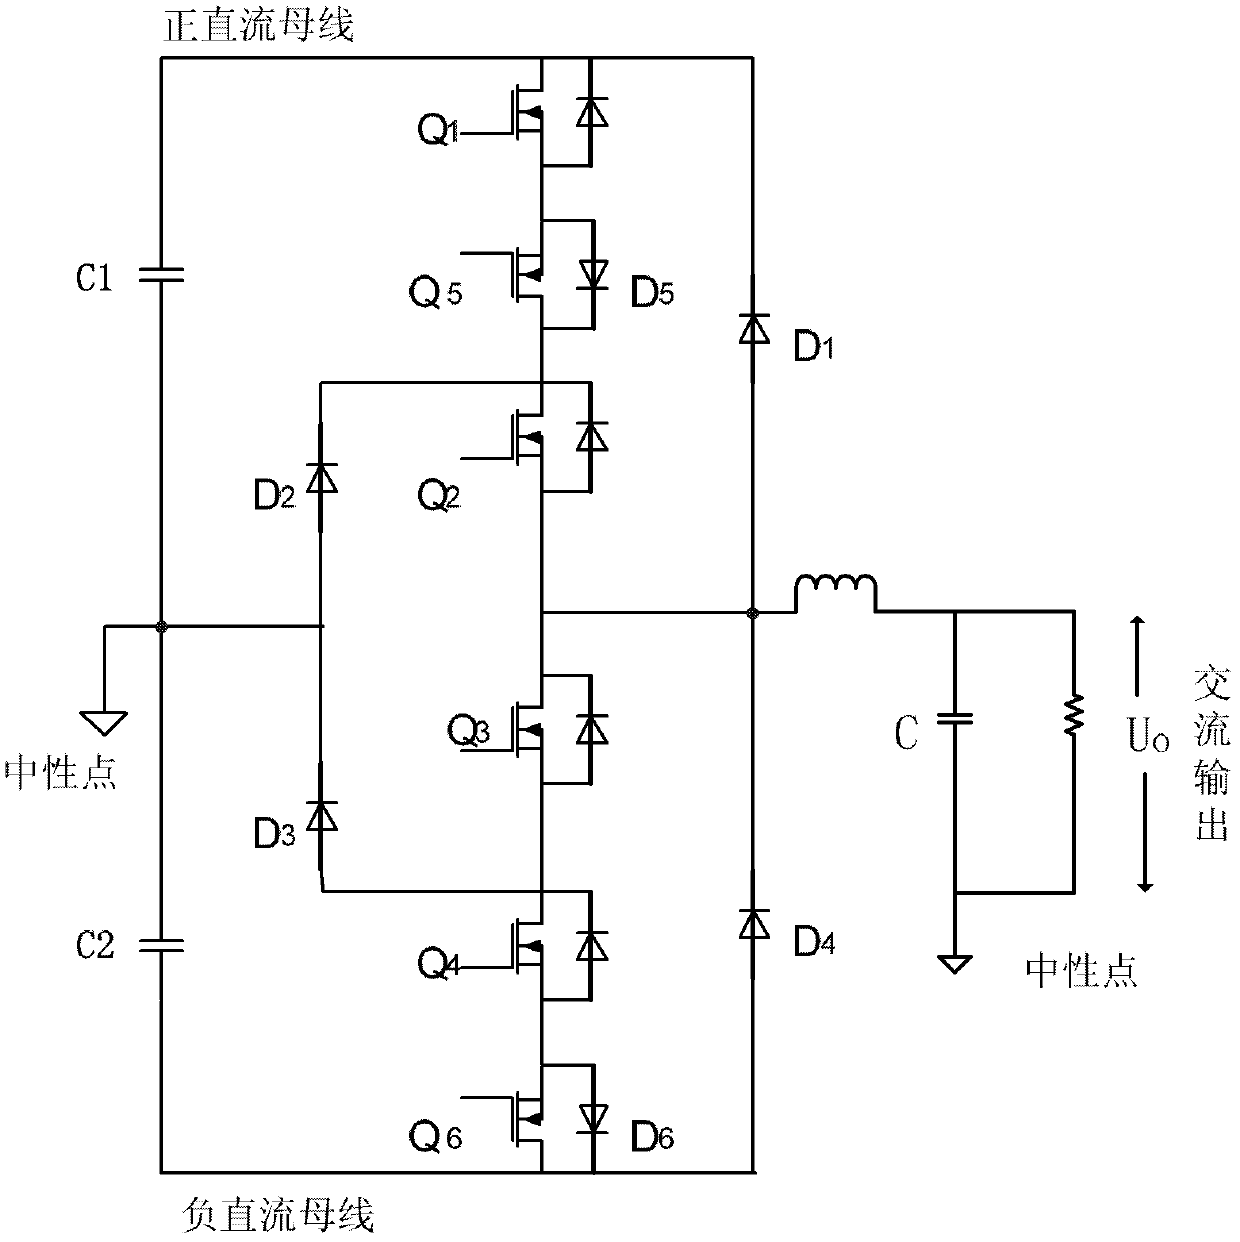 Inverter topology in high frequency application and control method of inverter topology